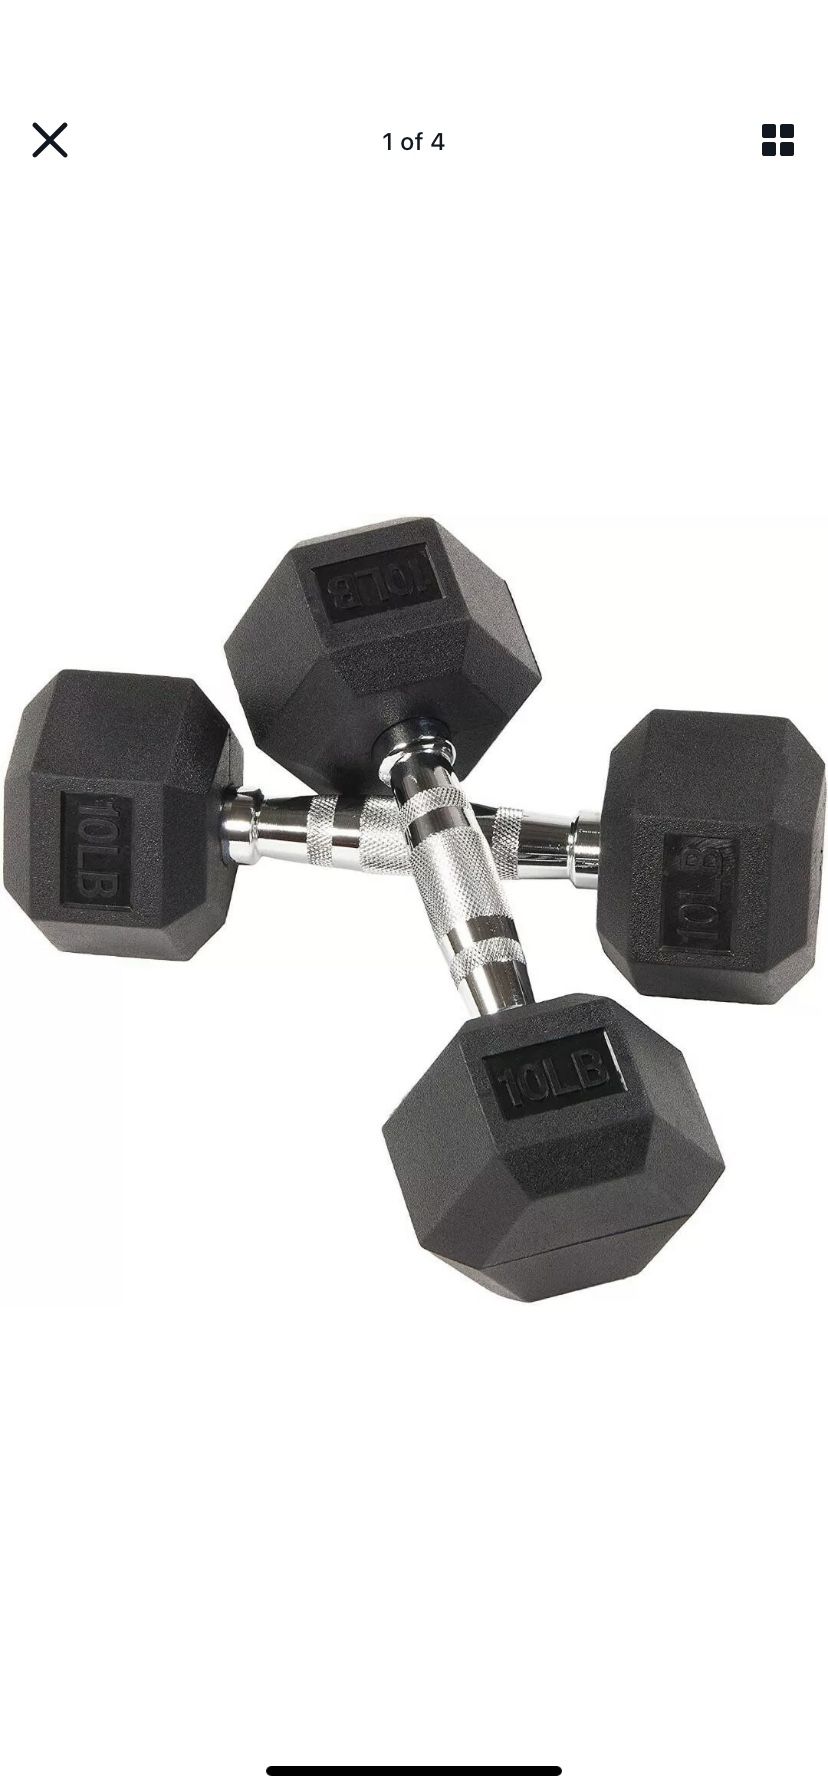 ☘️Factory Sealed  HEX Rubber  Dumbbells 💪🏻 SET of Two, 10lb=$19, 15lb=$29, Quality Quaranteed